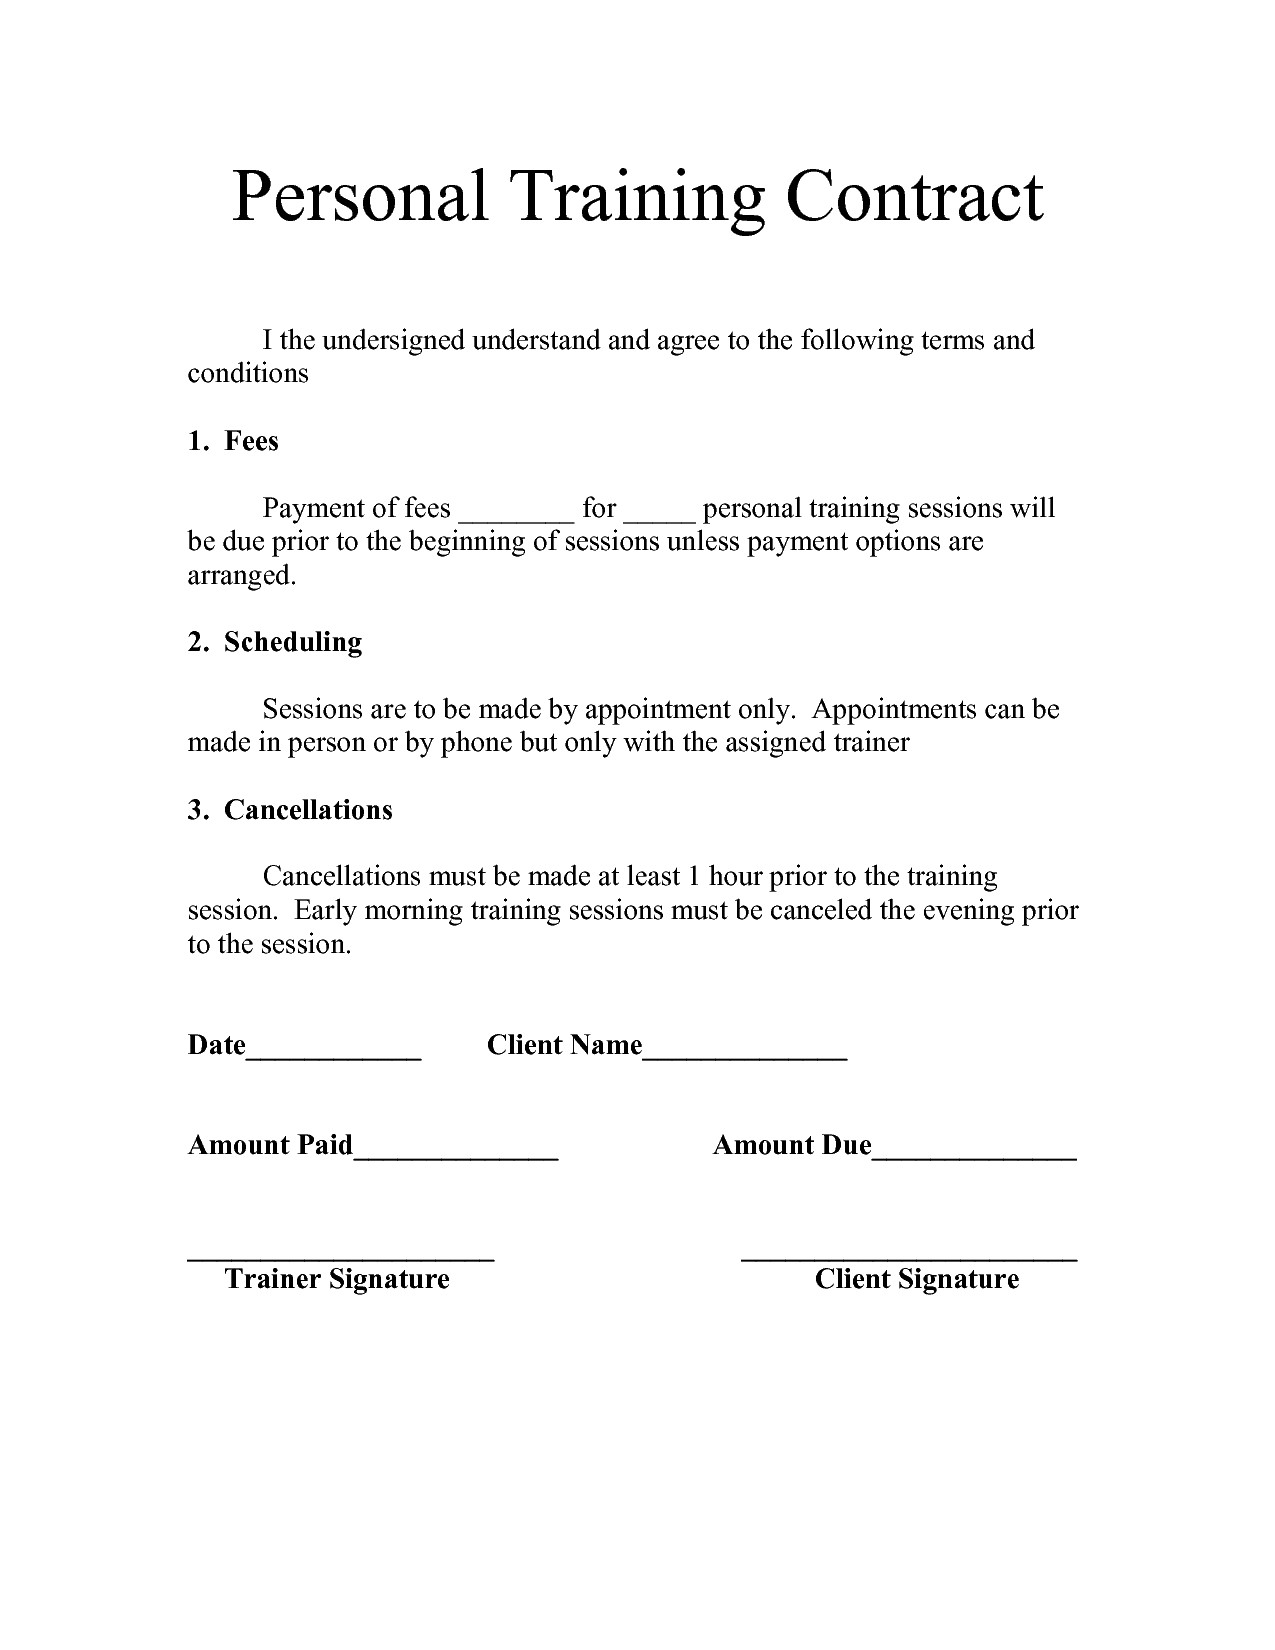 Personal Training Contract Templates